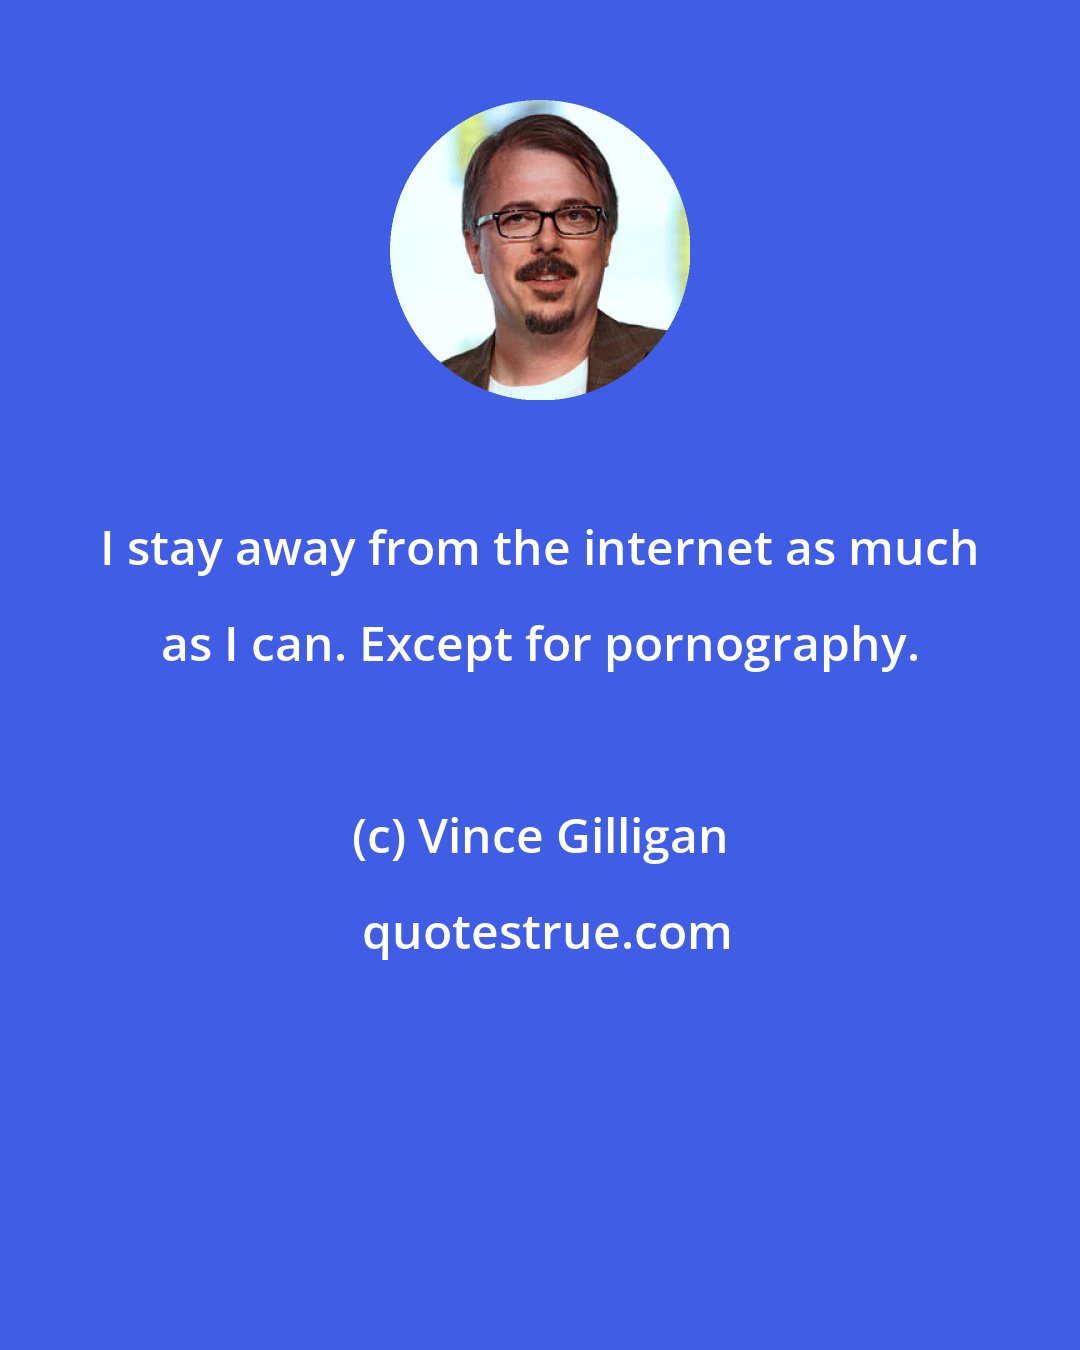 Vince Gilligan: I stay away from the internet as much as I can. Except for pornography.